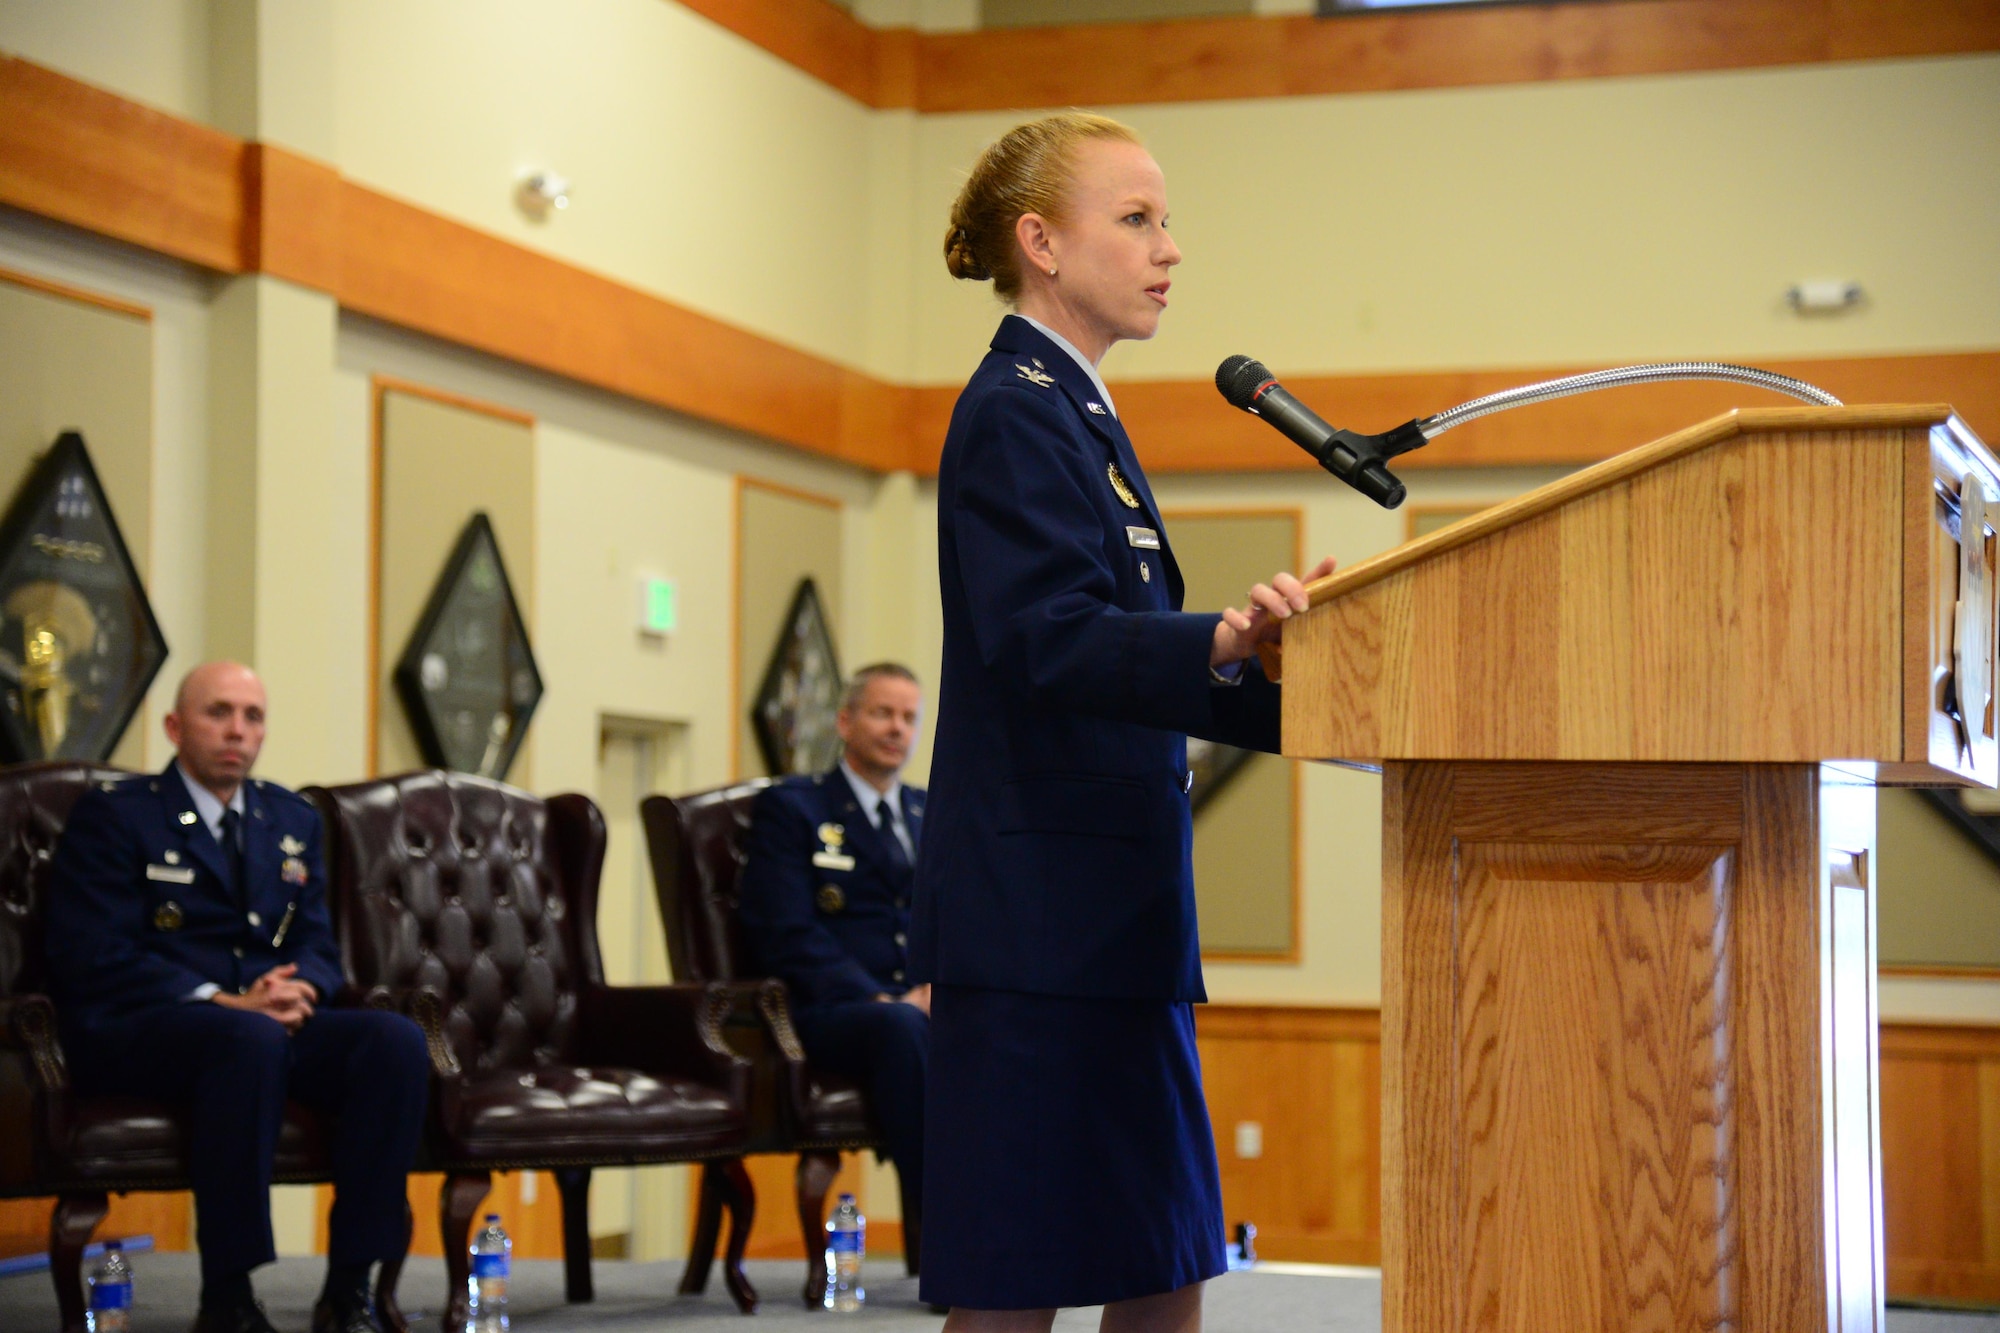 Col. Anita Feugate Opperman, 341st Operations Group commander, speaks at her change of command ceremony June 24, 2016, at Malmstrom Air Force Base, Mont. Feugate Opperman commissioned in the Air Force in 1994, under the Reserve Officers Training Corps program. (U.S. Air Force photo/Airman 1st Class Magen Reeves)